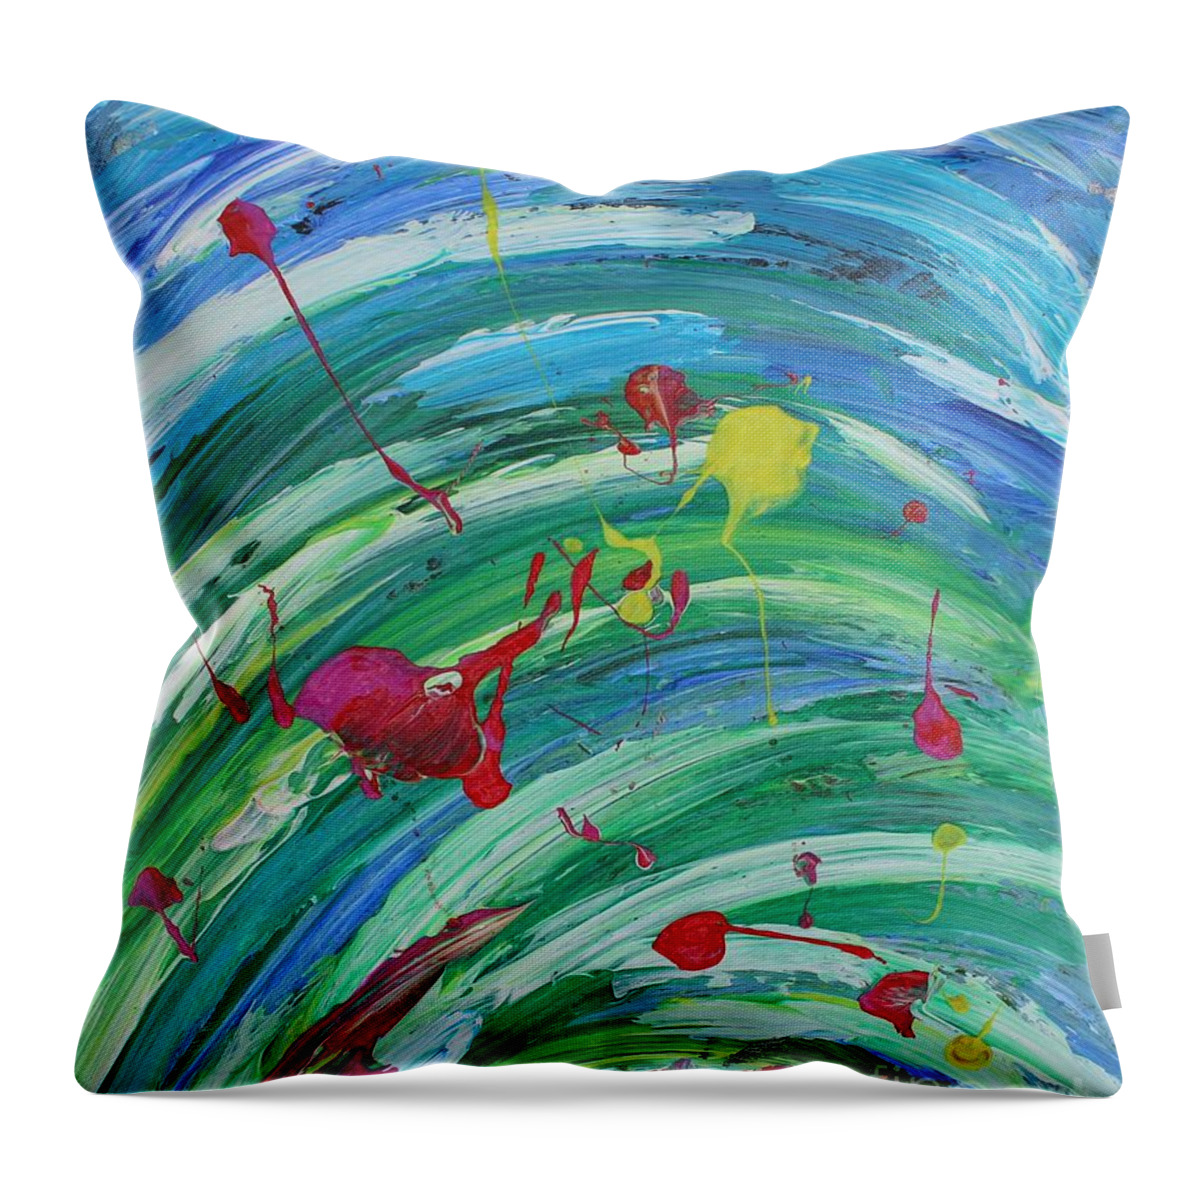 Happiness   Bliss Contentment Delight Elation Enjoyment Euphoria Exhilaration Jubilation Laughter Optimism  Peace Of Mind Pleasure Prosperity Well-being Beatitude Blessedness Cheer Cheerfulness Content Deliriums Ecstasy Enchantment Exuberance Felicity Gaiety Geniality Gladness Hilarity Hopefulness Joviality Lighthearted Merriment Mirth Joy Happy Throw Pillow featuring the painting Happiness by Sarahleah Hankes